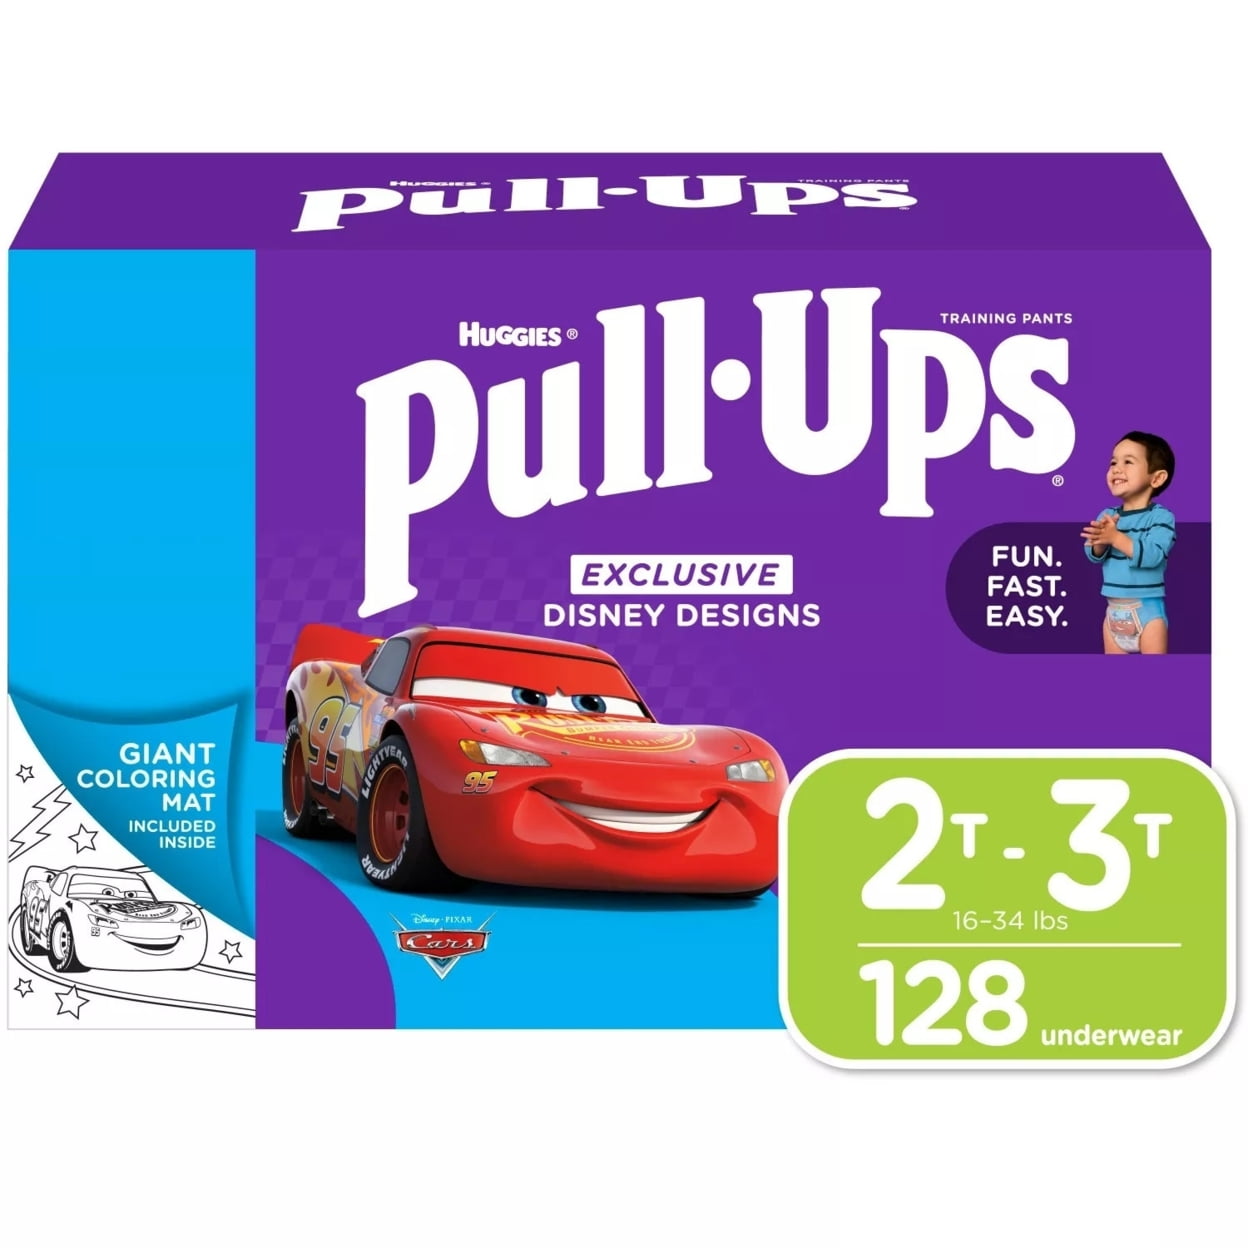 Pull-Ups Night-Time Training Pants For Boys 2t-3t (18-), 50 units (34 lb), Delivery Near You